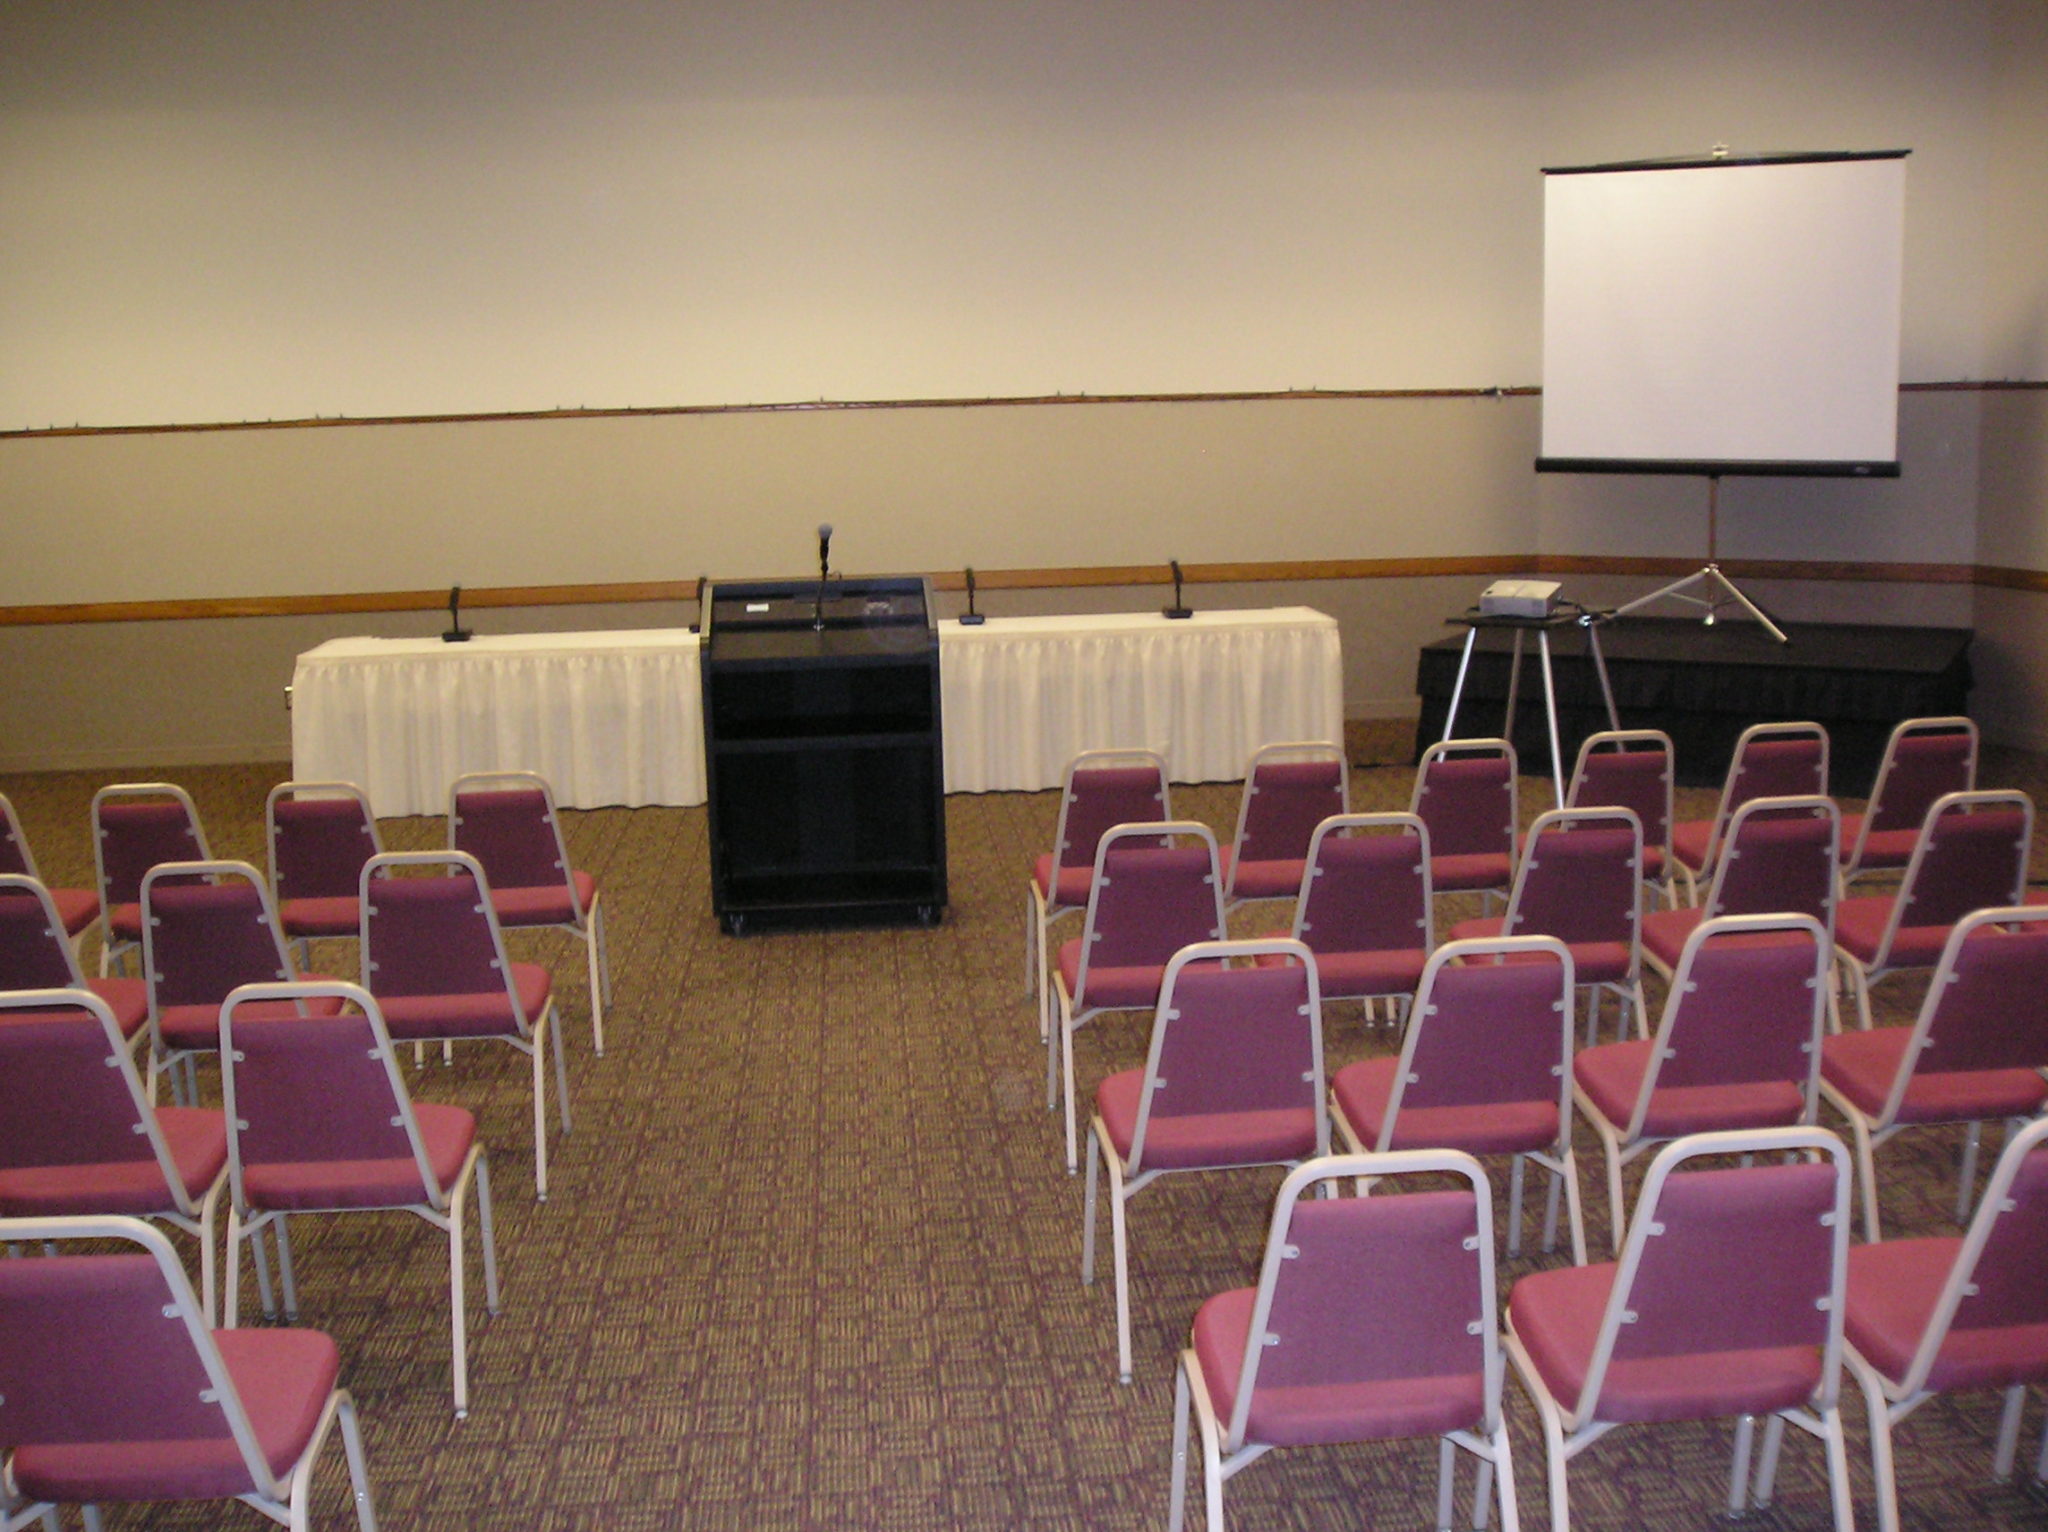 chairs set up for a meeting in front of a head table and white board